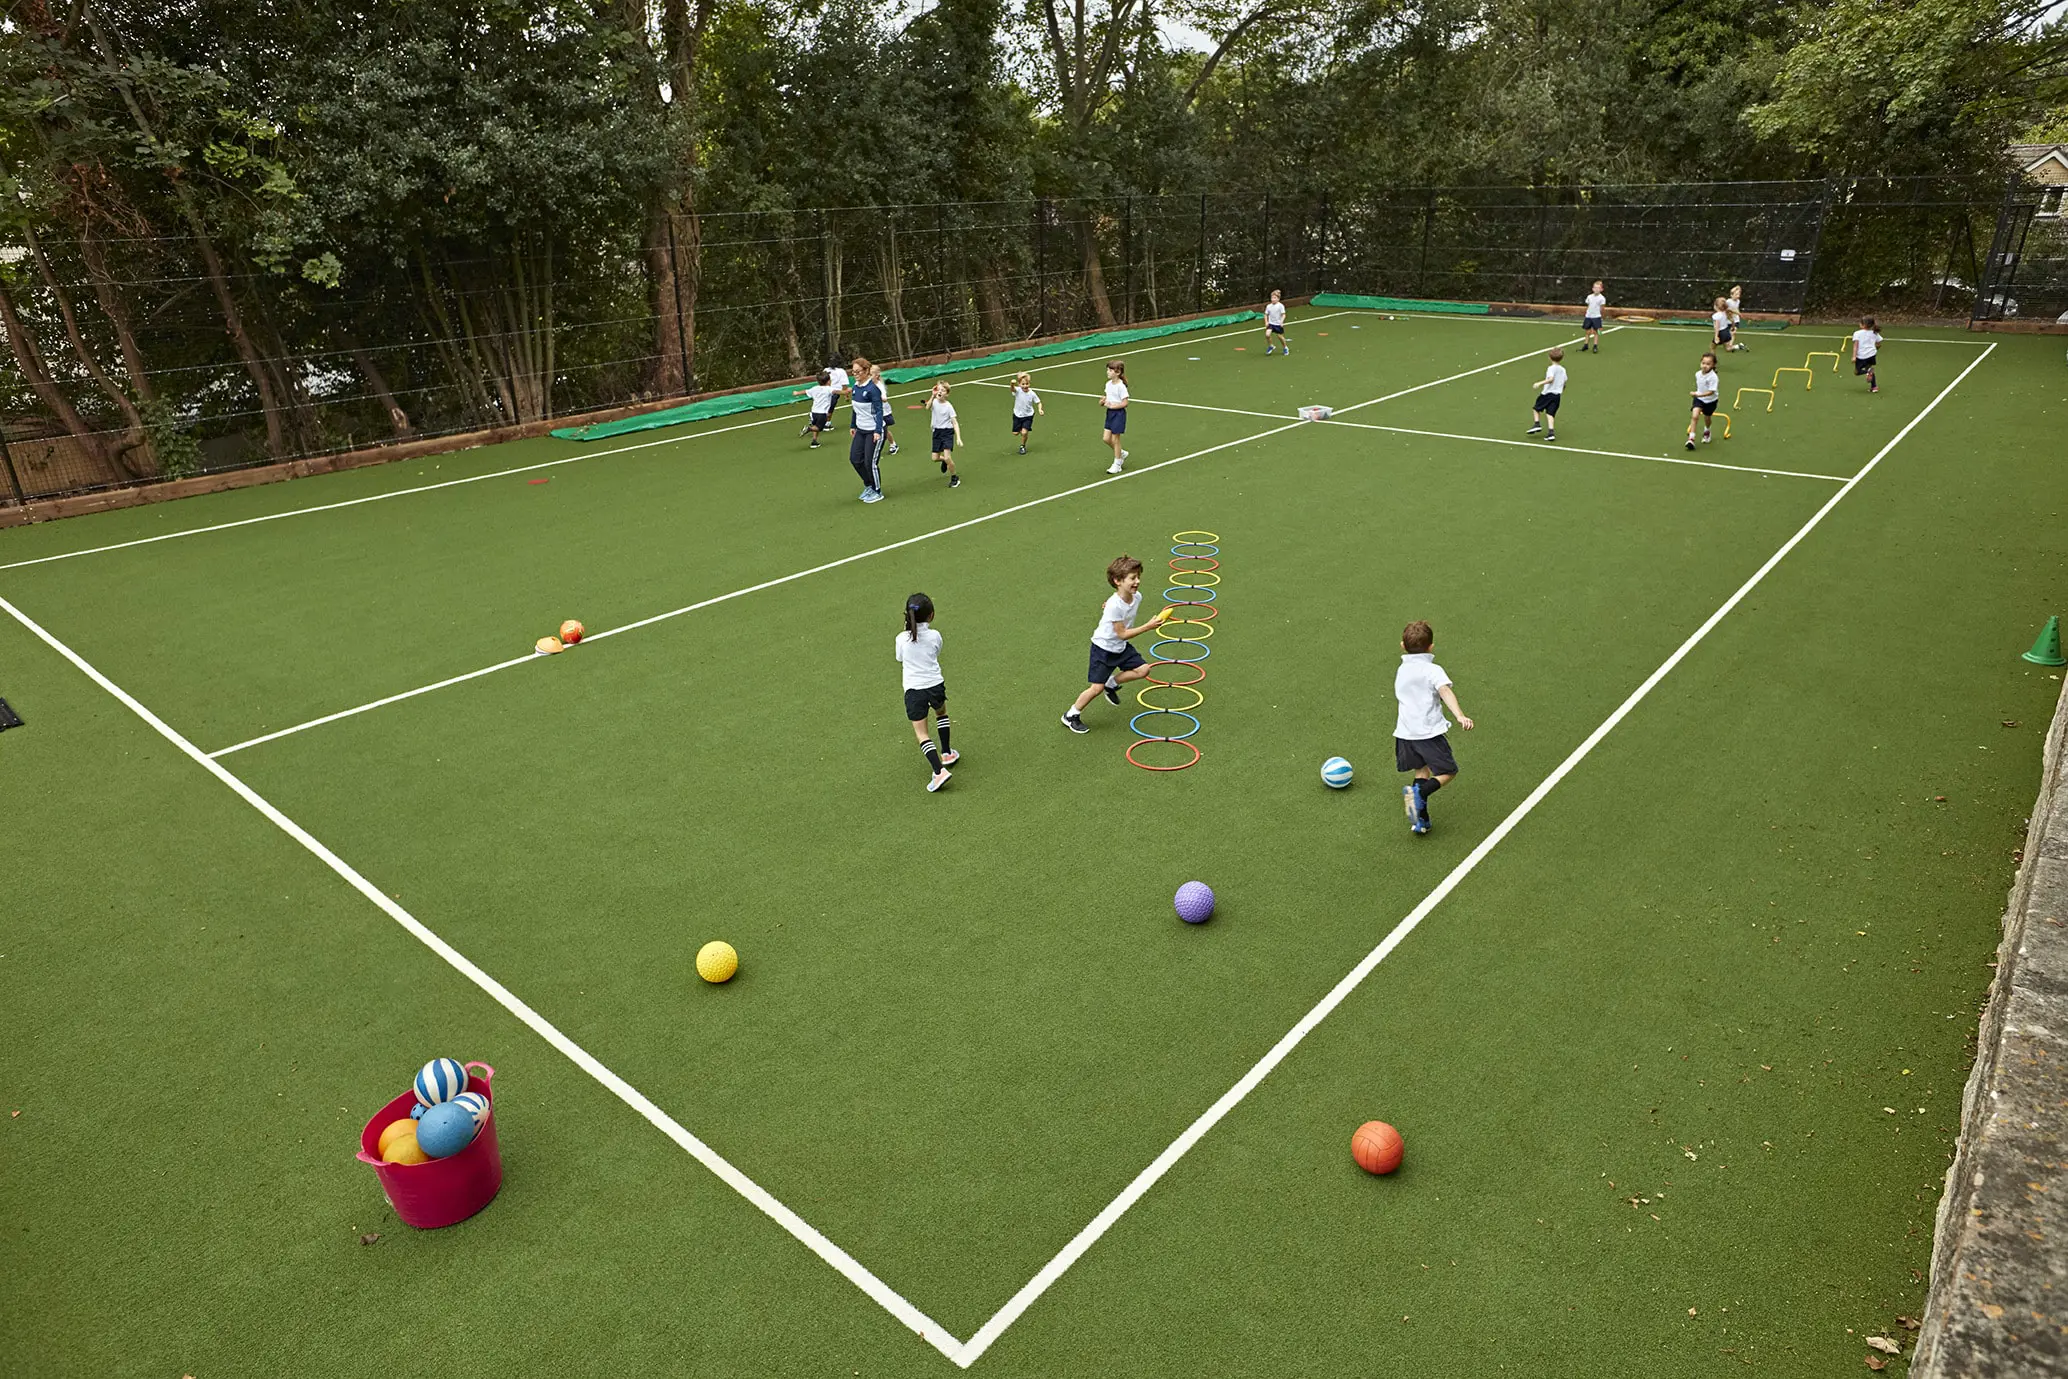 KES Bath pupils playing football outside on all weather pitch